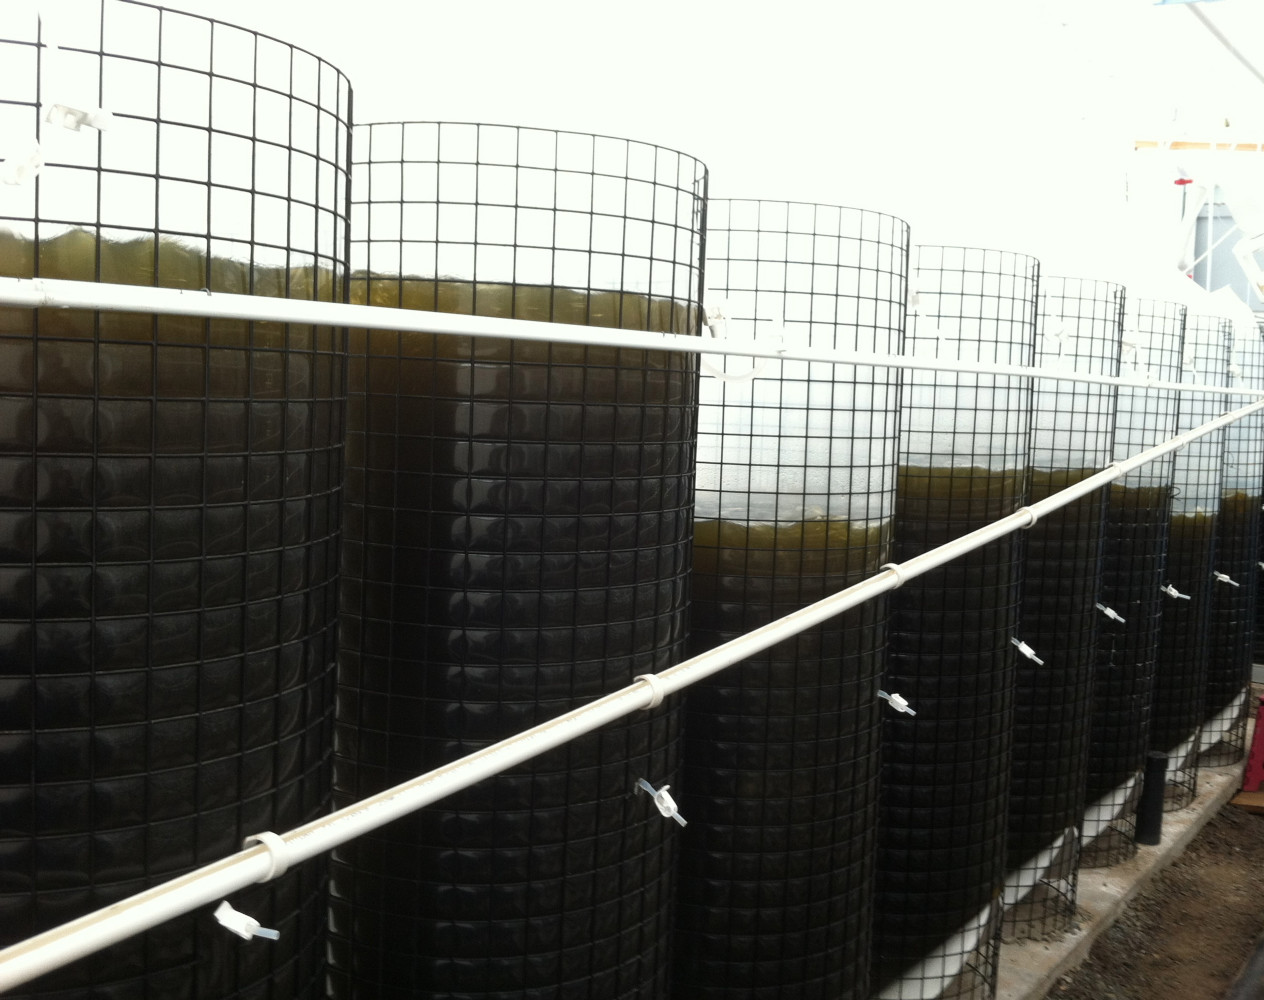 SEACAPS IS A COMPLETELY INTEGRATED SYSTEM THAT REDUCES UP TO 90% OF TRADITIONAL ALGAE CULTURE COSTS